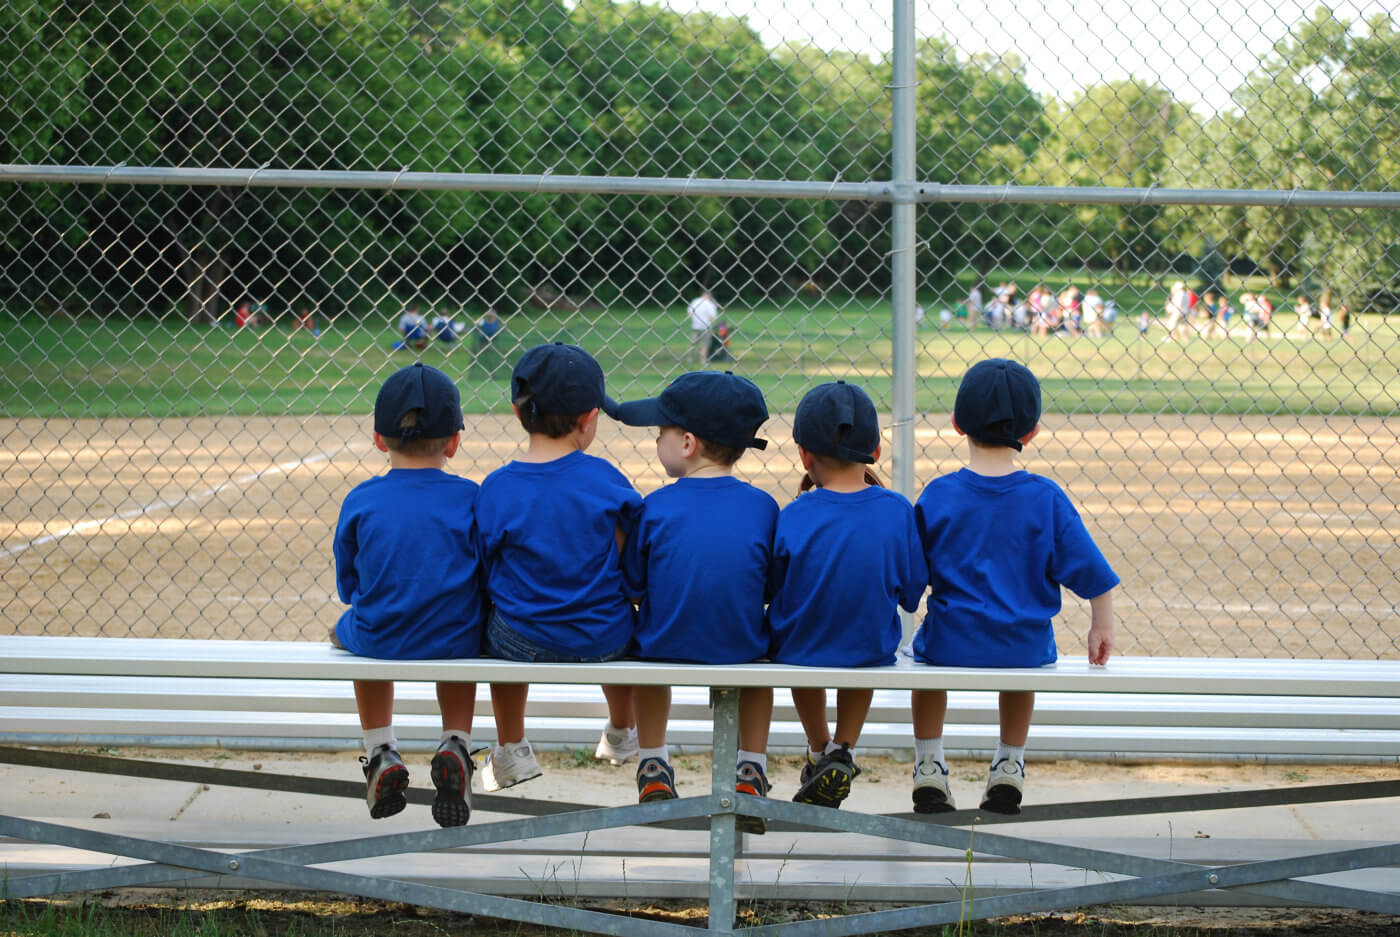 Should youth athletes on a team get equal playing time